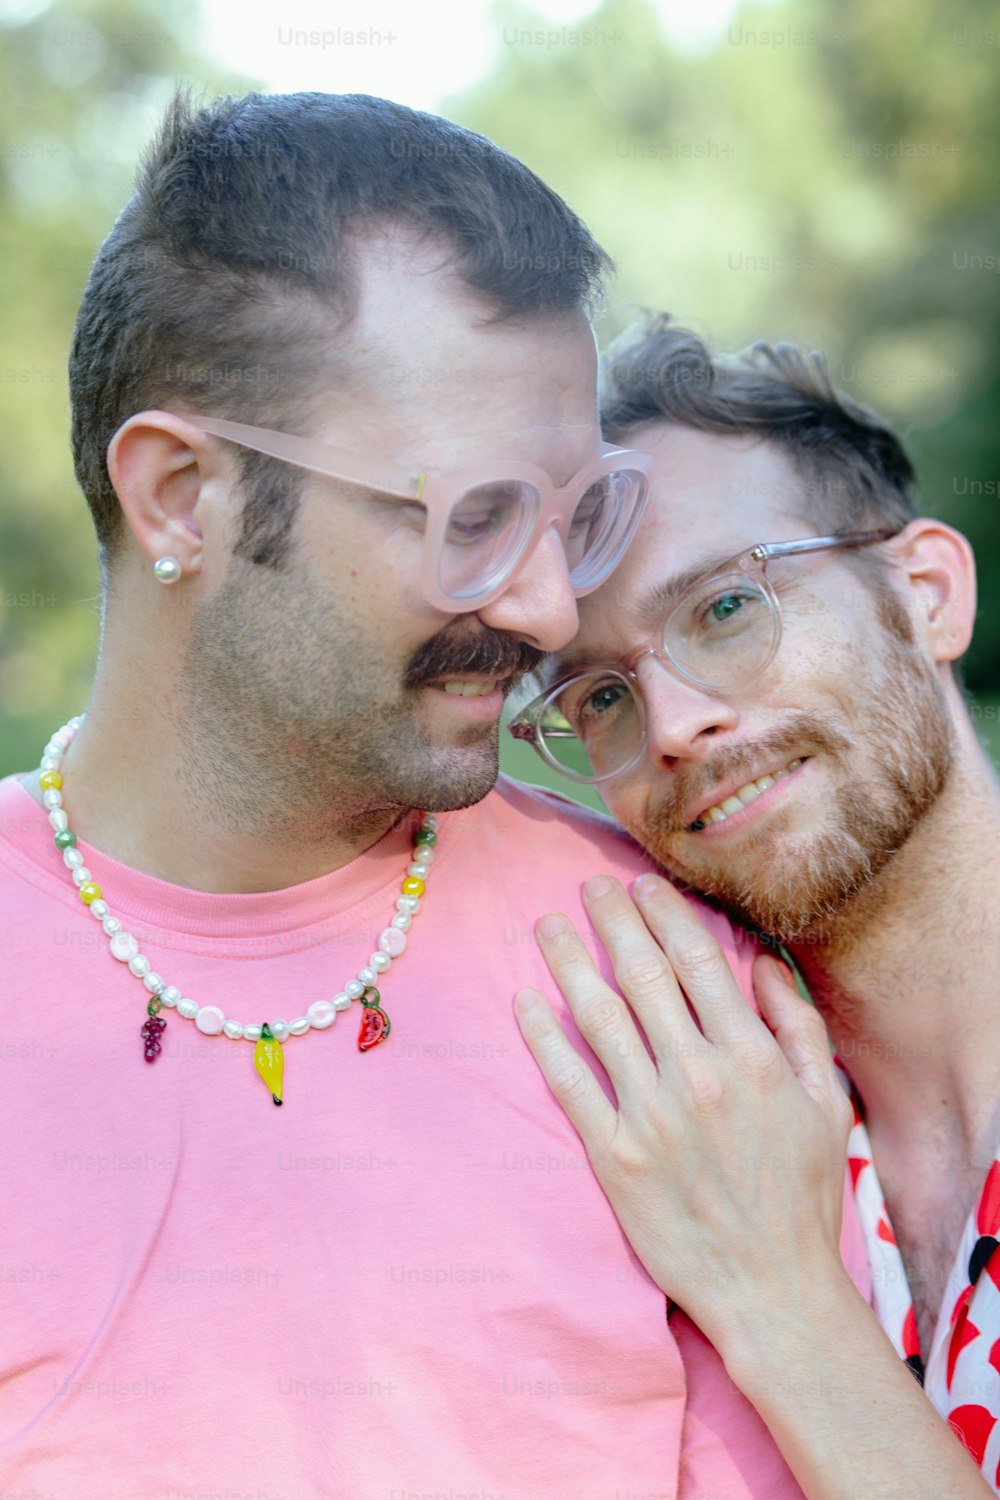 a man with a beard and glasses hugging another man